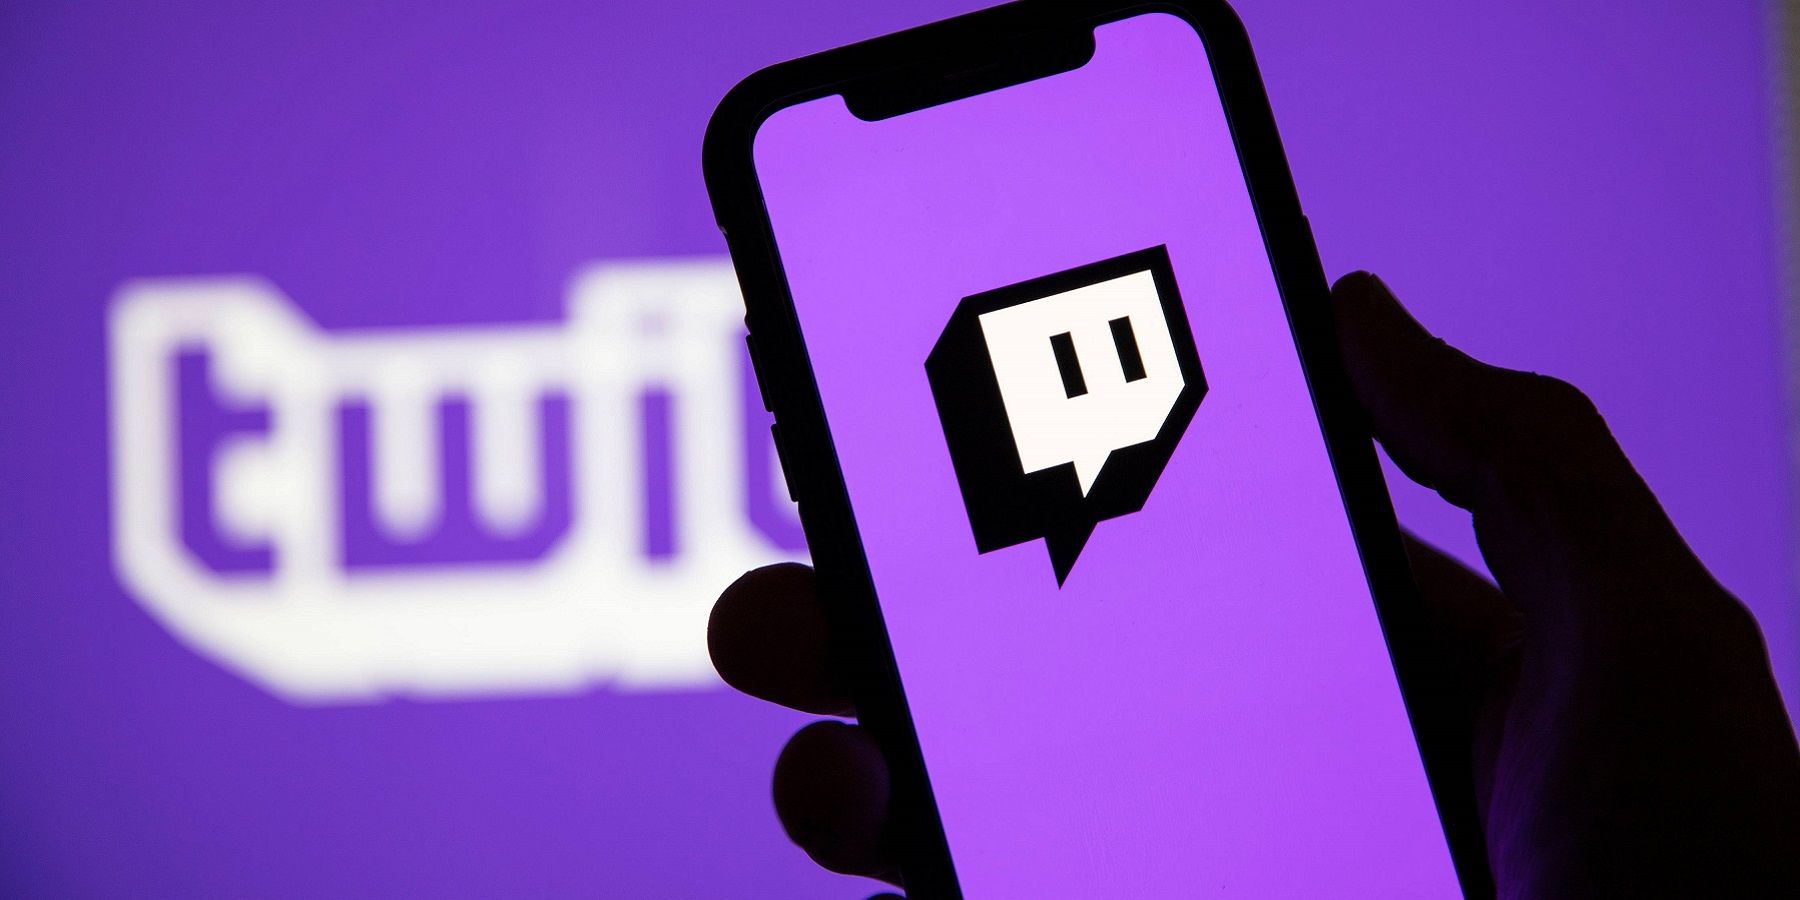 A han holding a phone that has the twitch logo on the screen, all on a purple background.